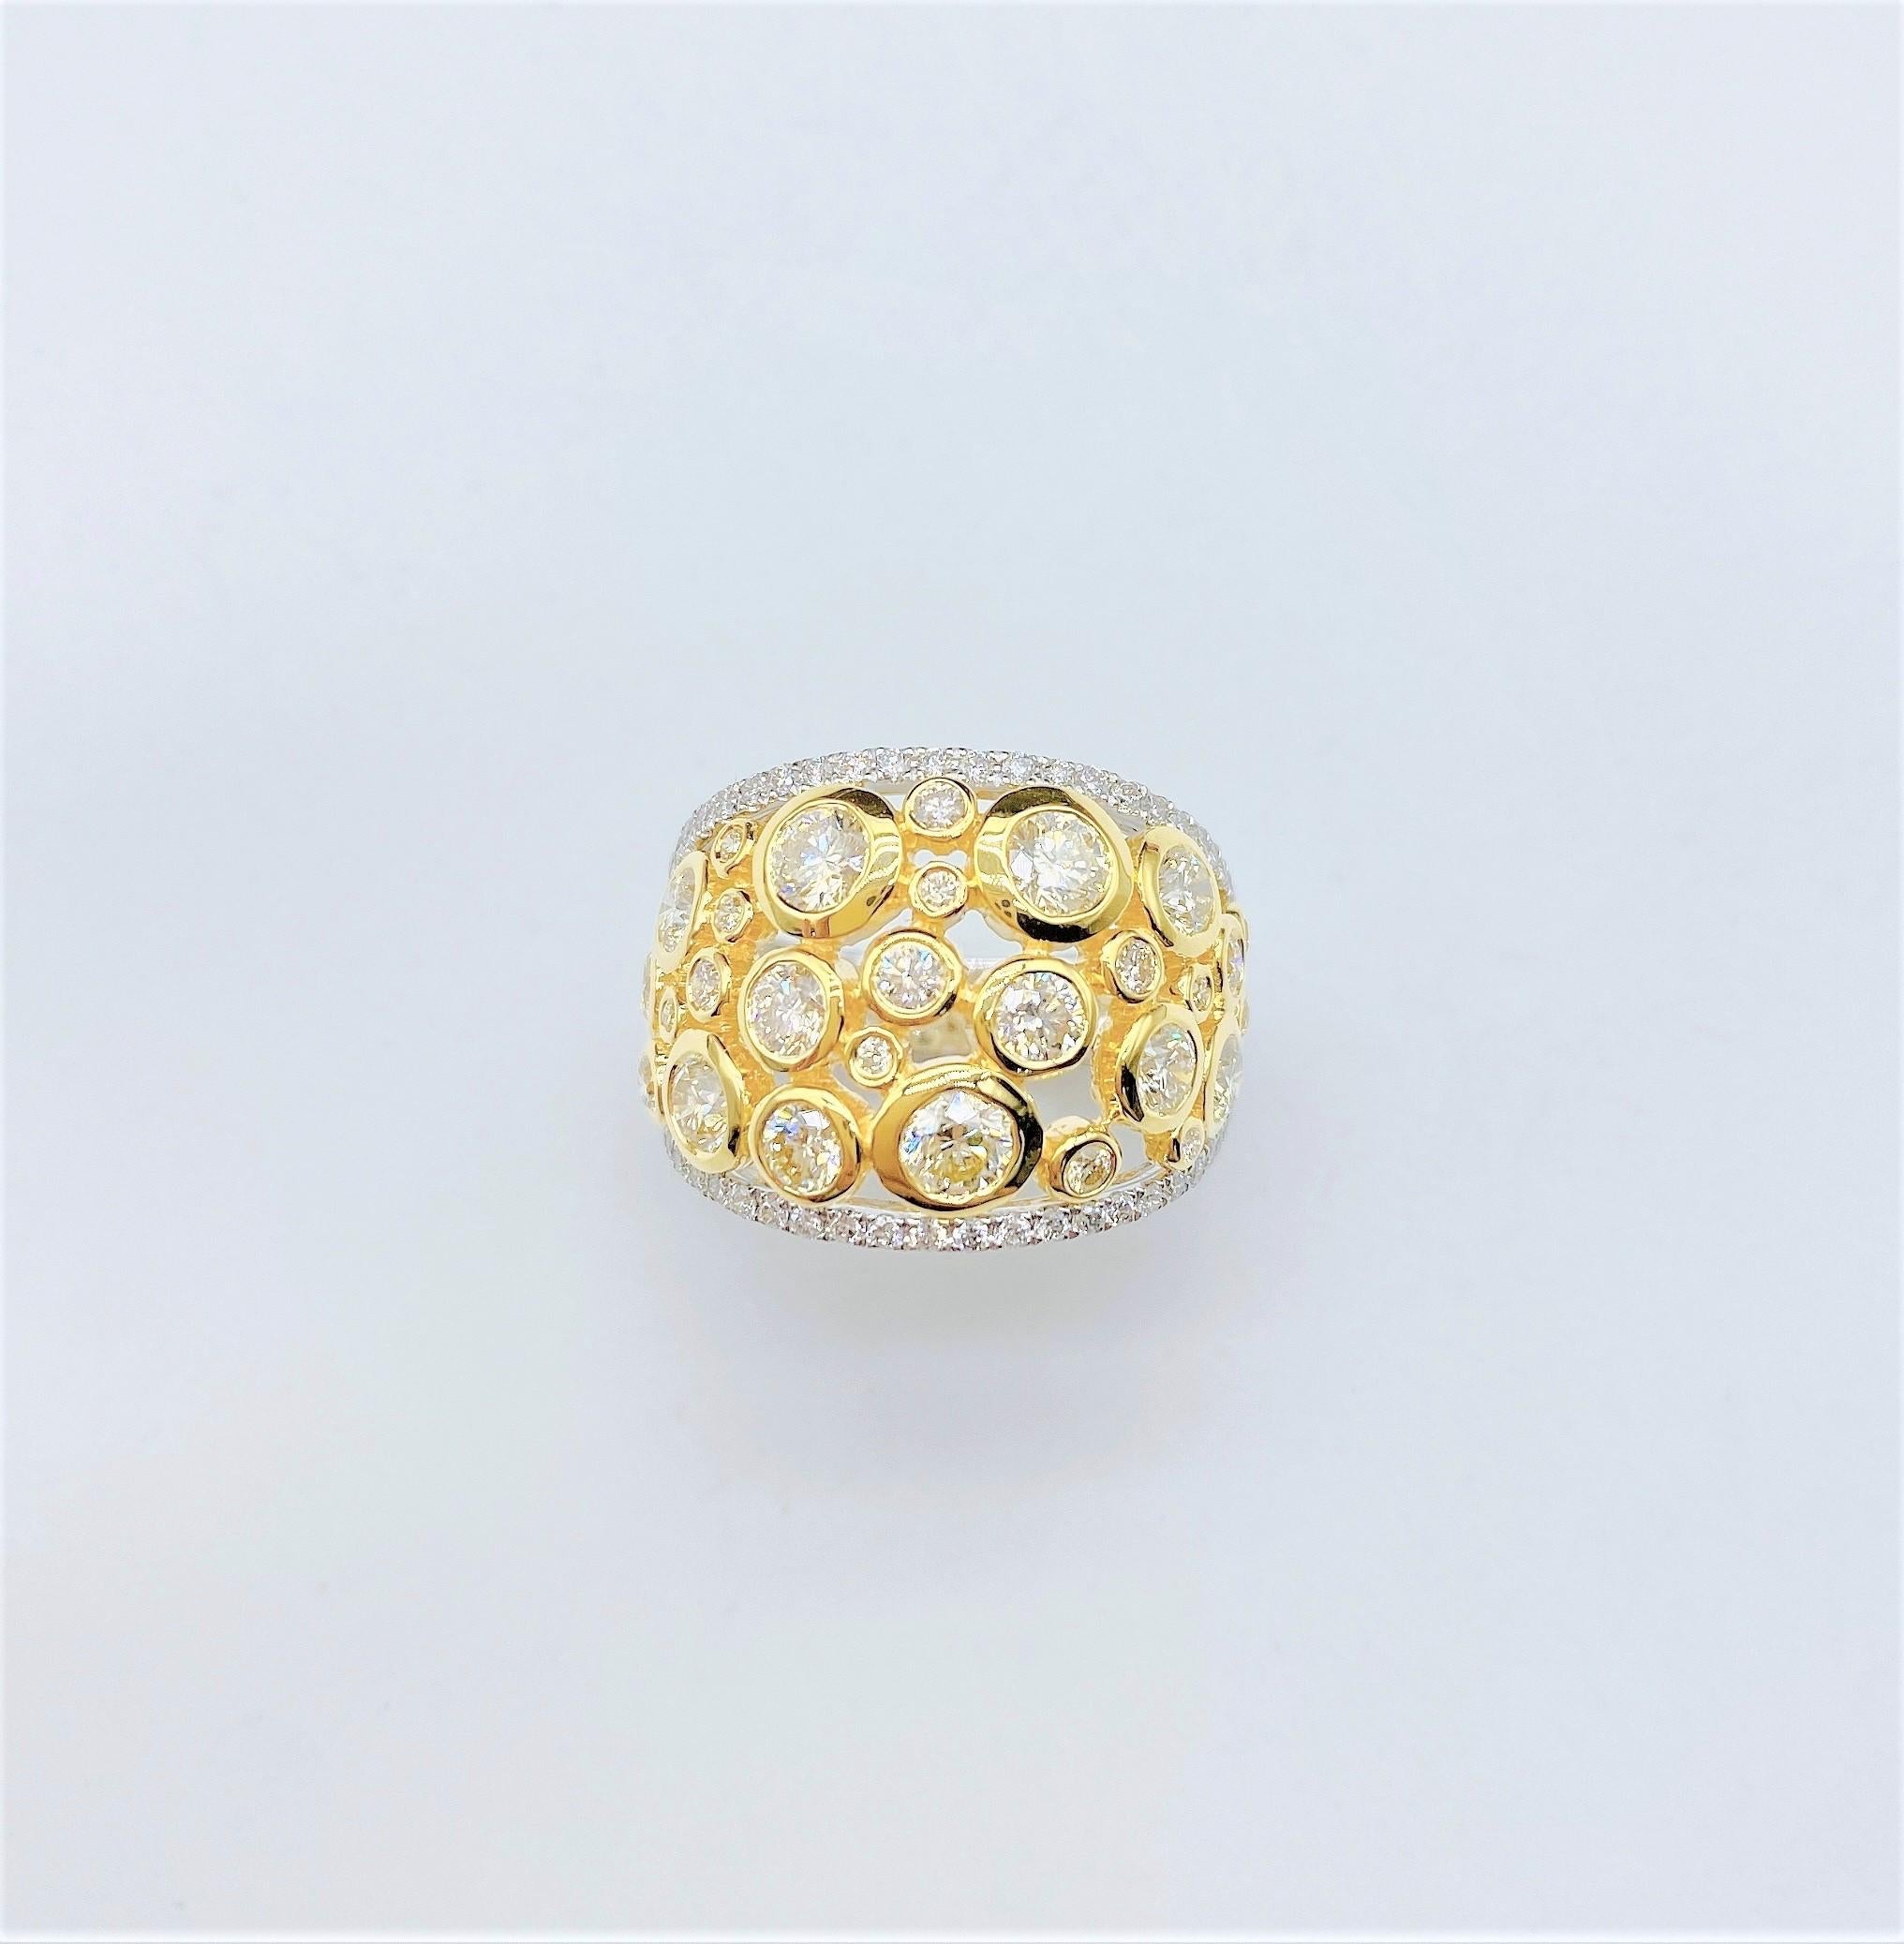 The Following Item we are offering is this Rare Important Radiant 18KT Yellow and White Gold Gorgeous and Sparkling Magnificent Fancy Cut Diamond Ring. Ring Contains approx 2CTS of Glittering Diamonds!!! Stones are Very Clean and Extremely